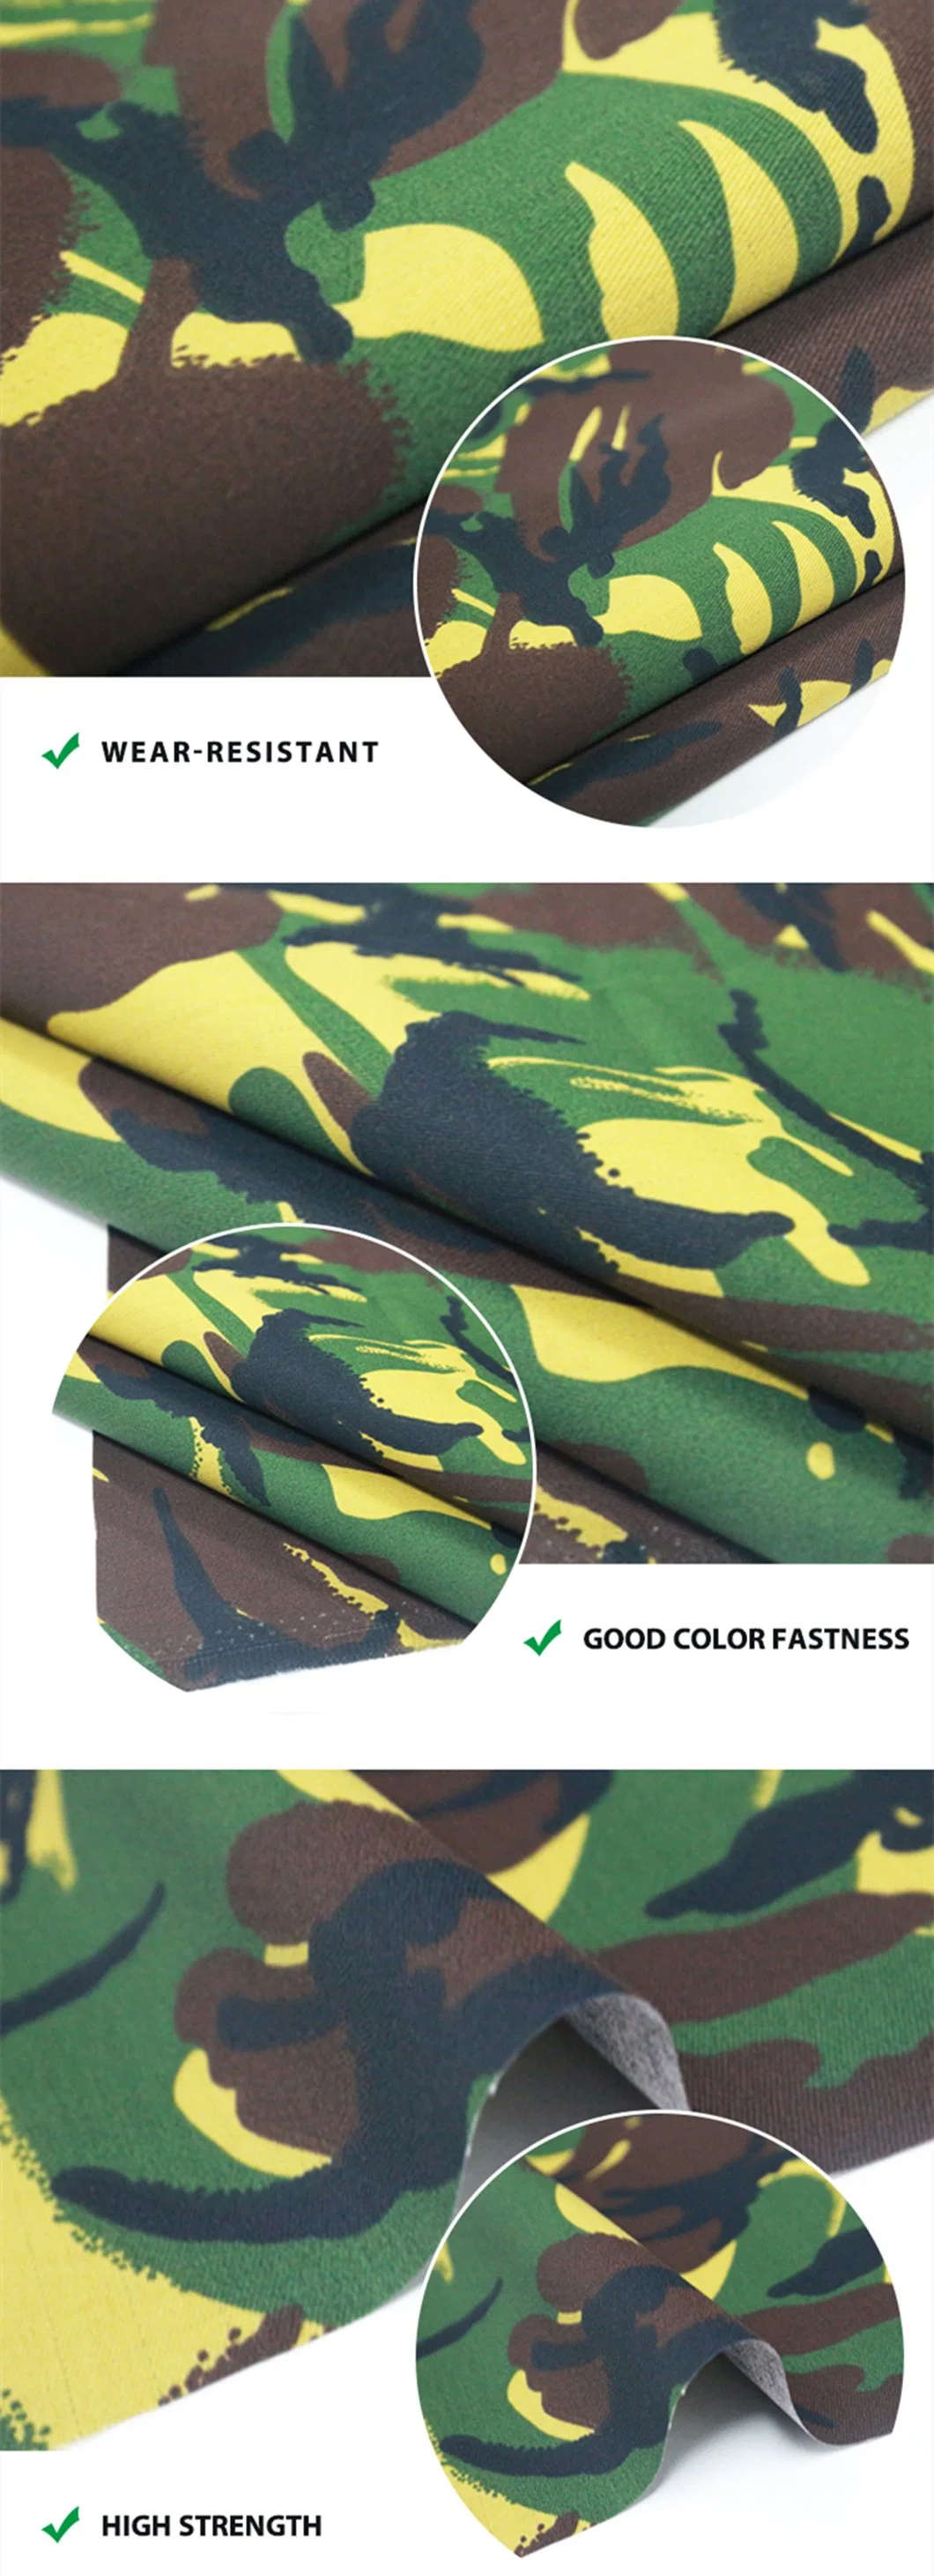 Fabric Online Hot Sale Oxford Fabric 600d Tent Material 600d Polyester Camouflage PVC Coated Oxford Fabric